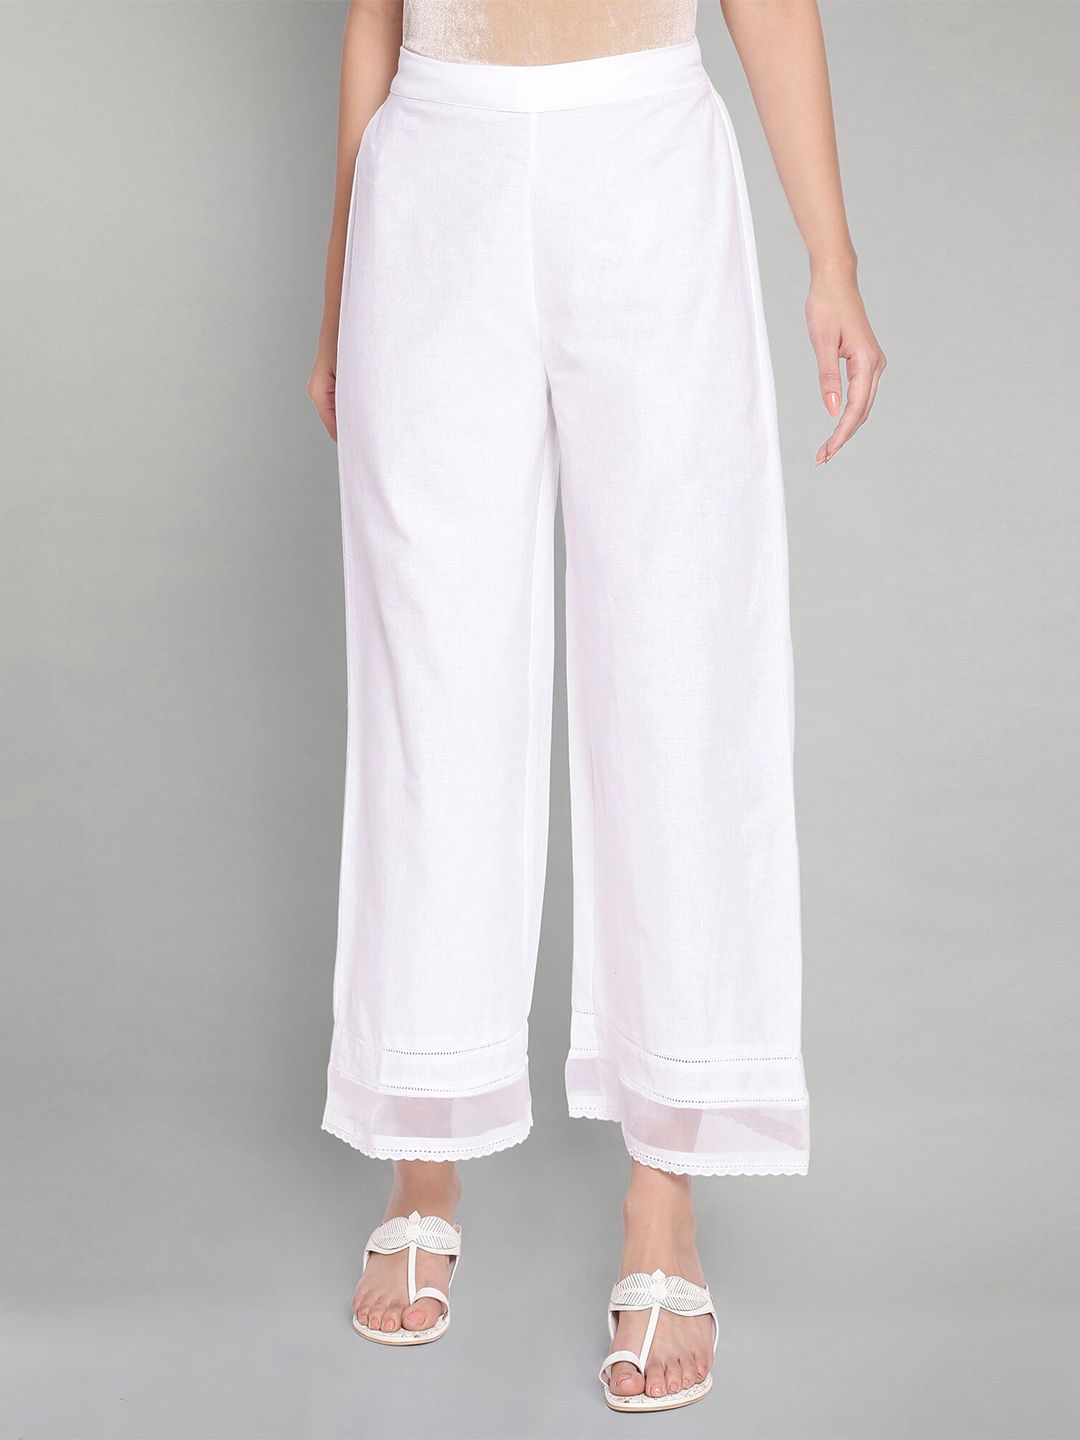 W Women White Solid Palazzos Price in India